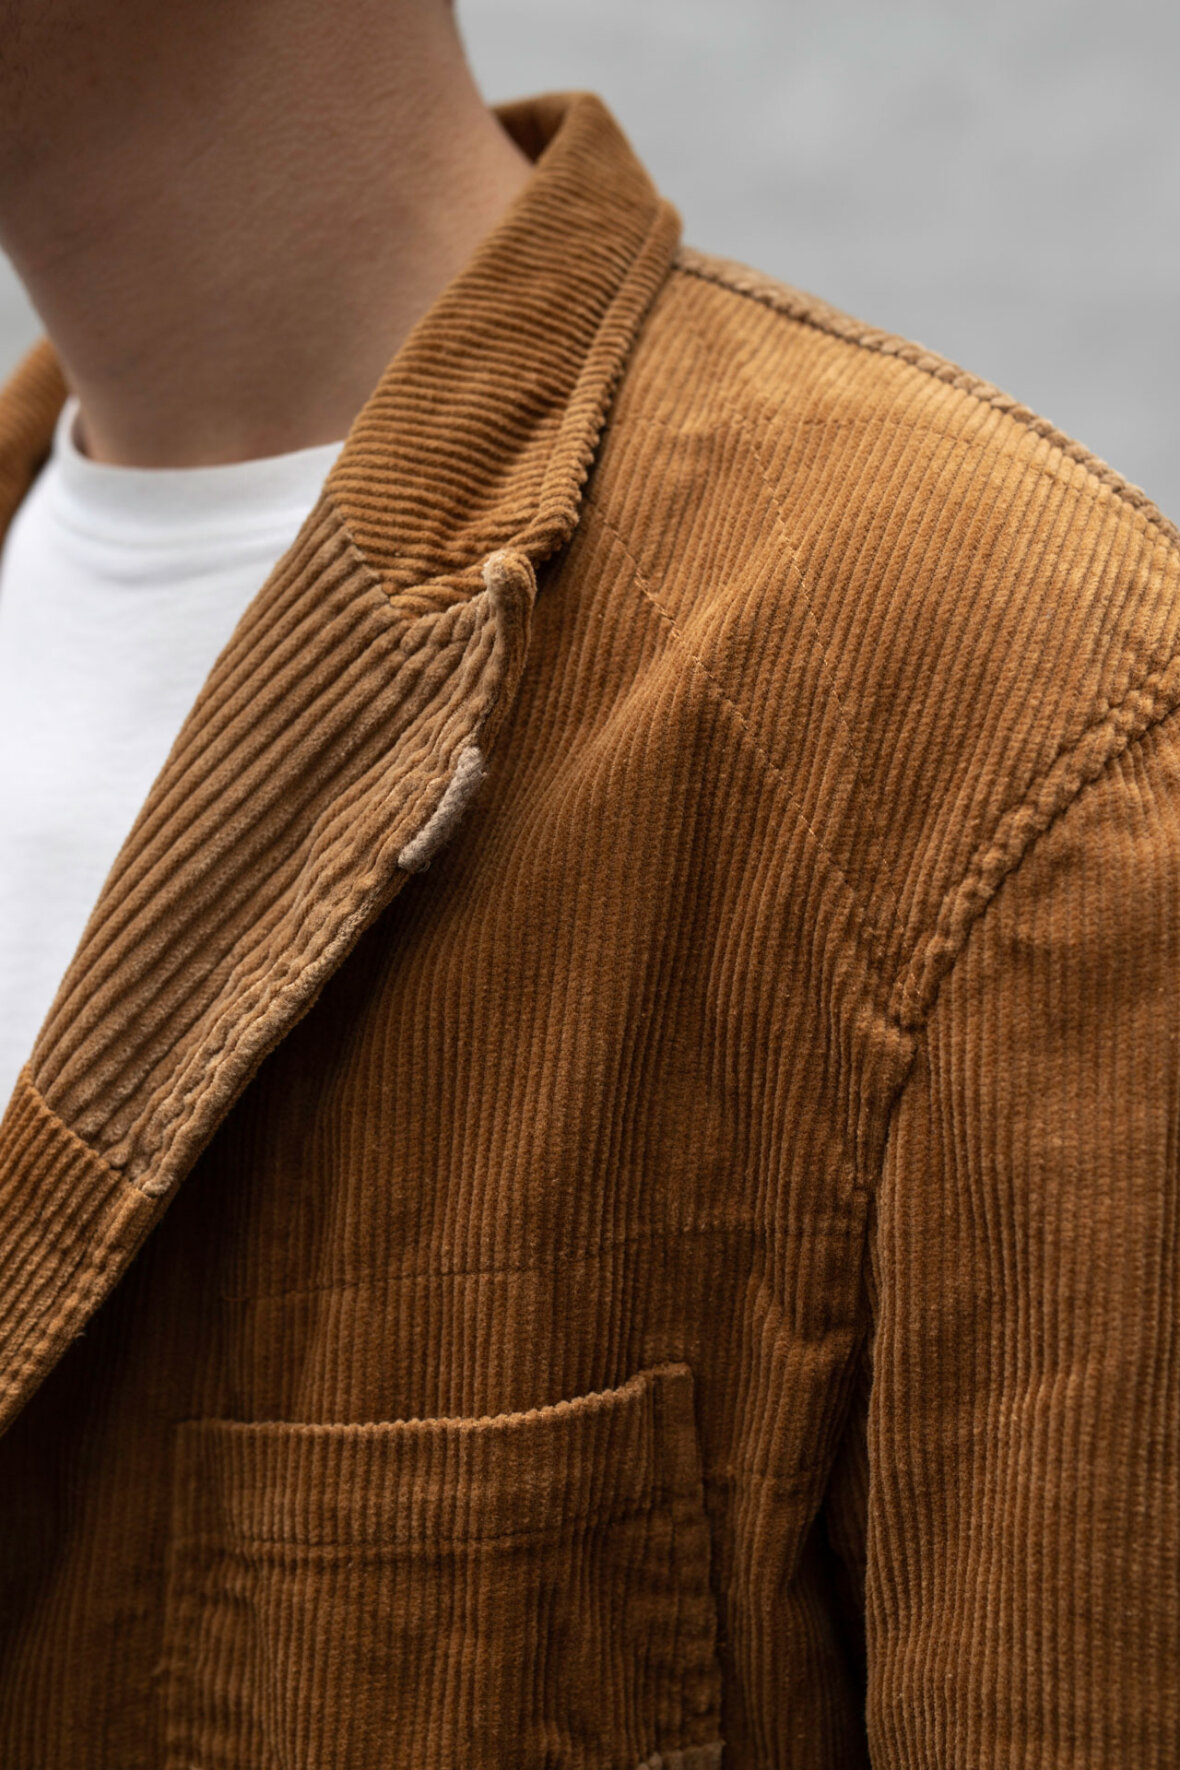 Norse Store | Shipping Worldwide - Product Focus: Engineered Garments  Autumn/Winter 19